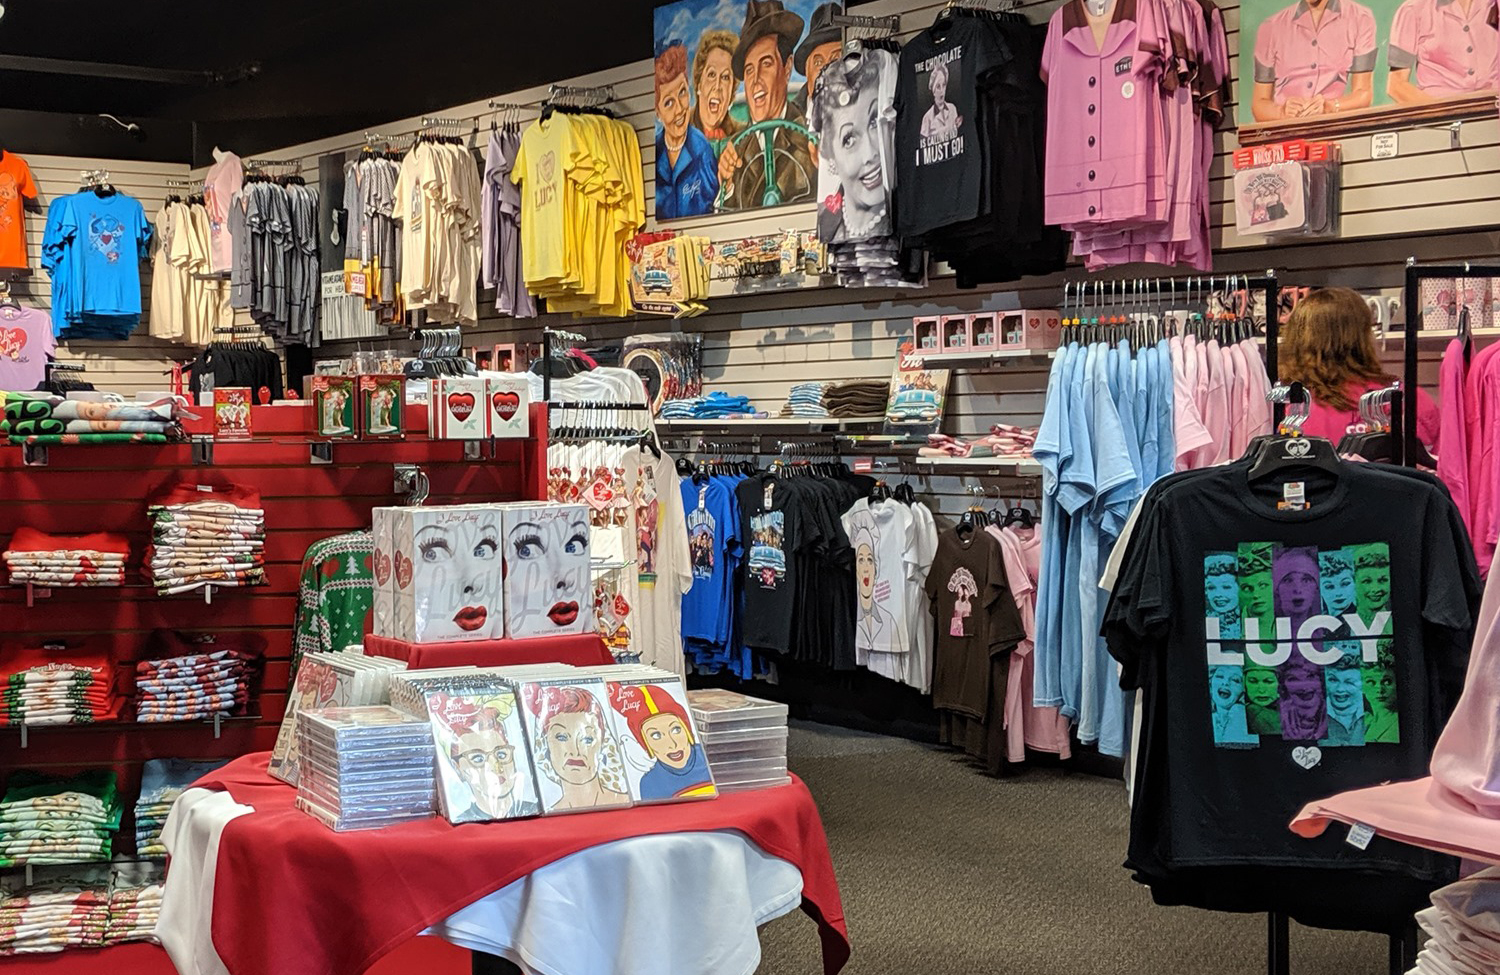 Visit the I Love Lucy Gift Shop in Jamestown NY